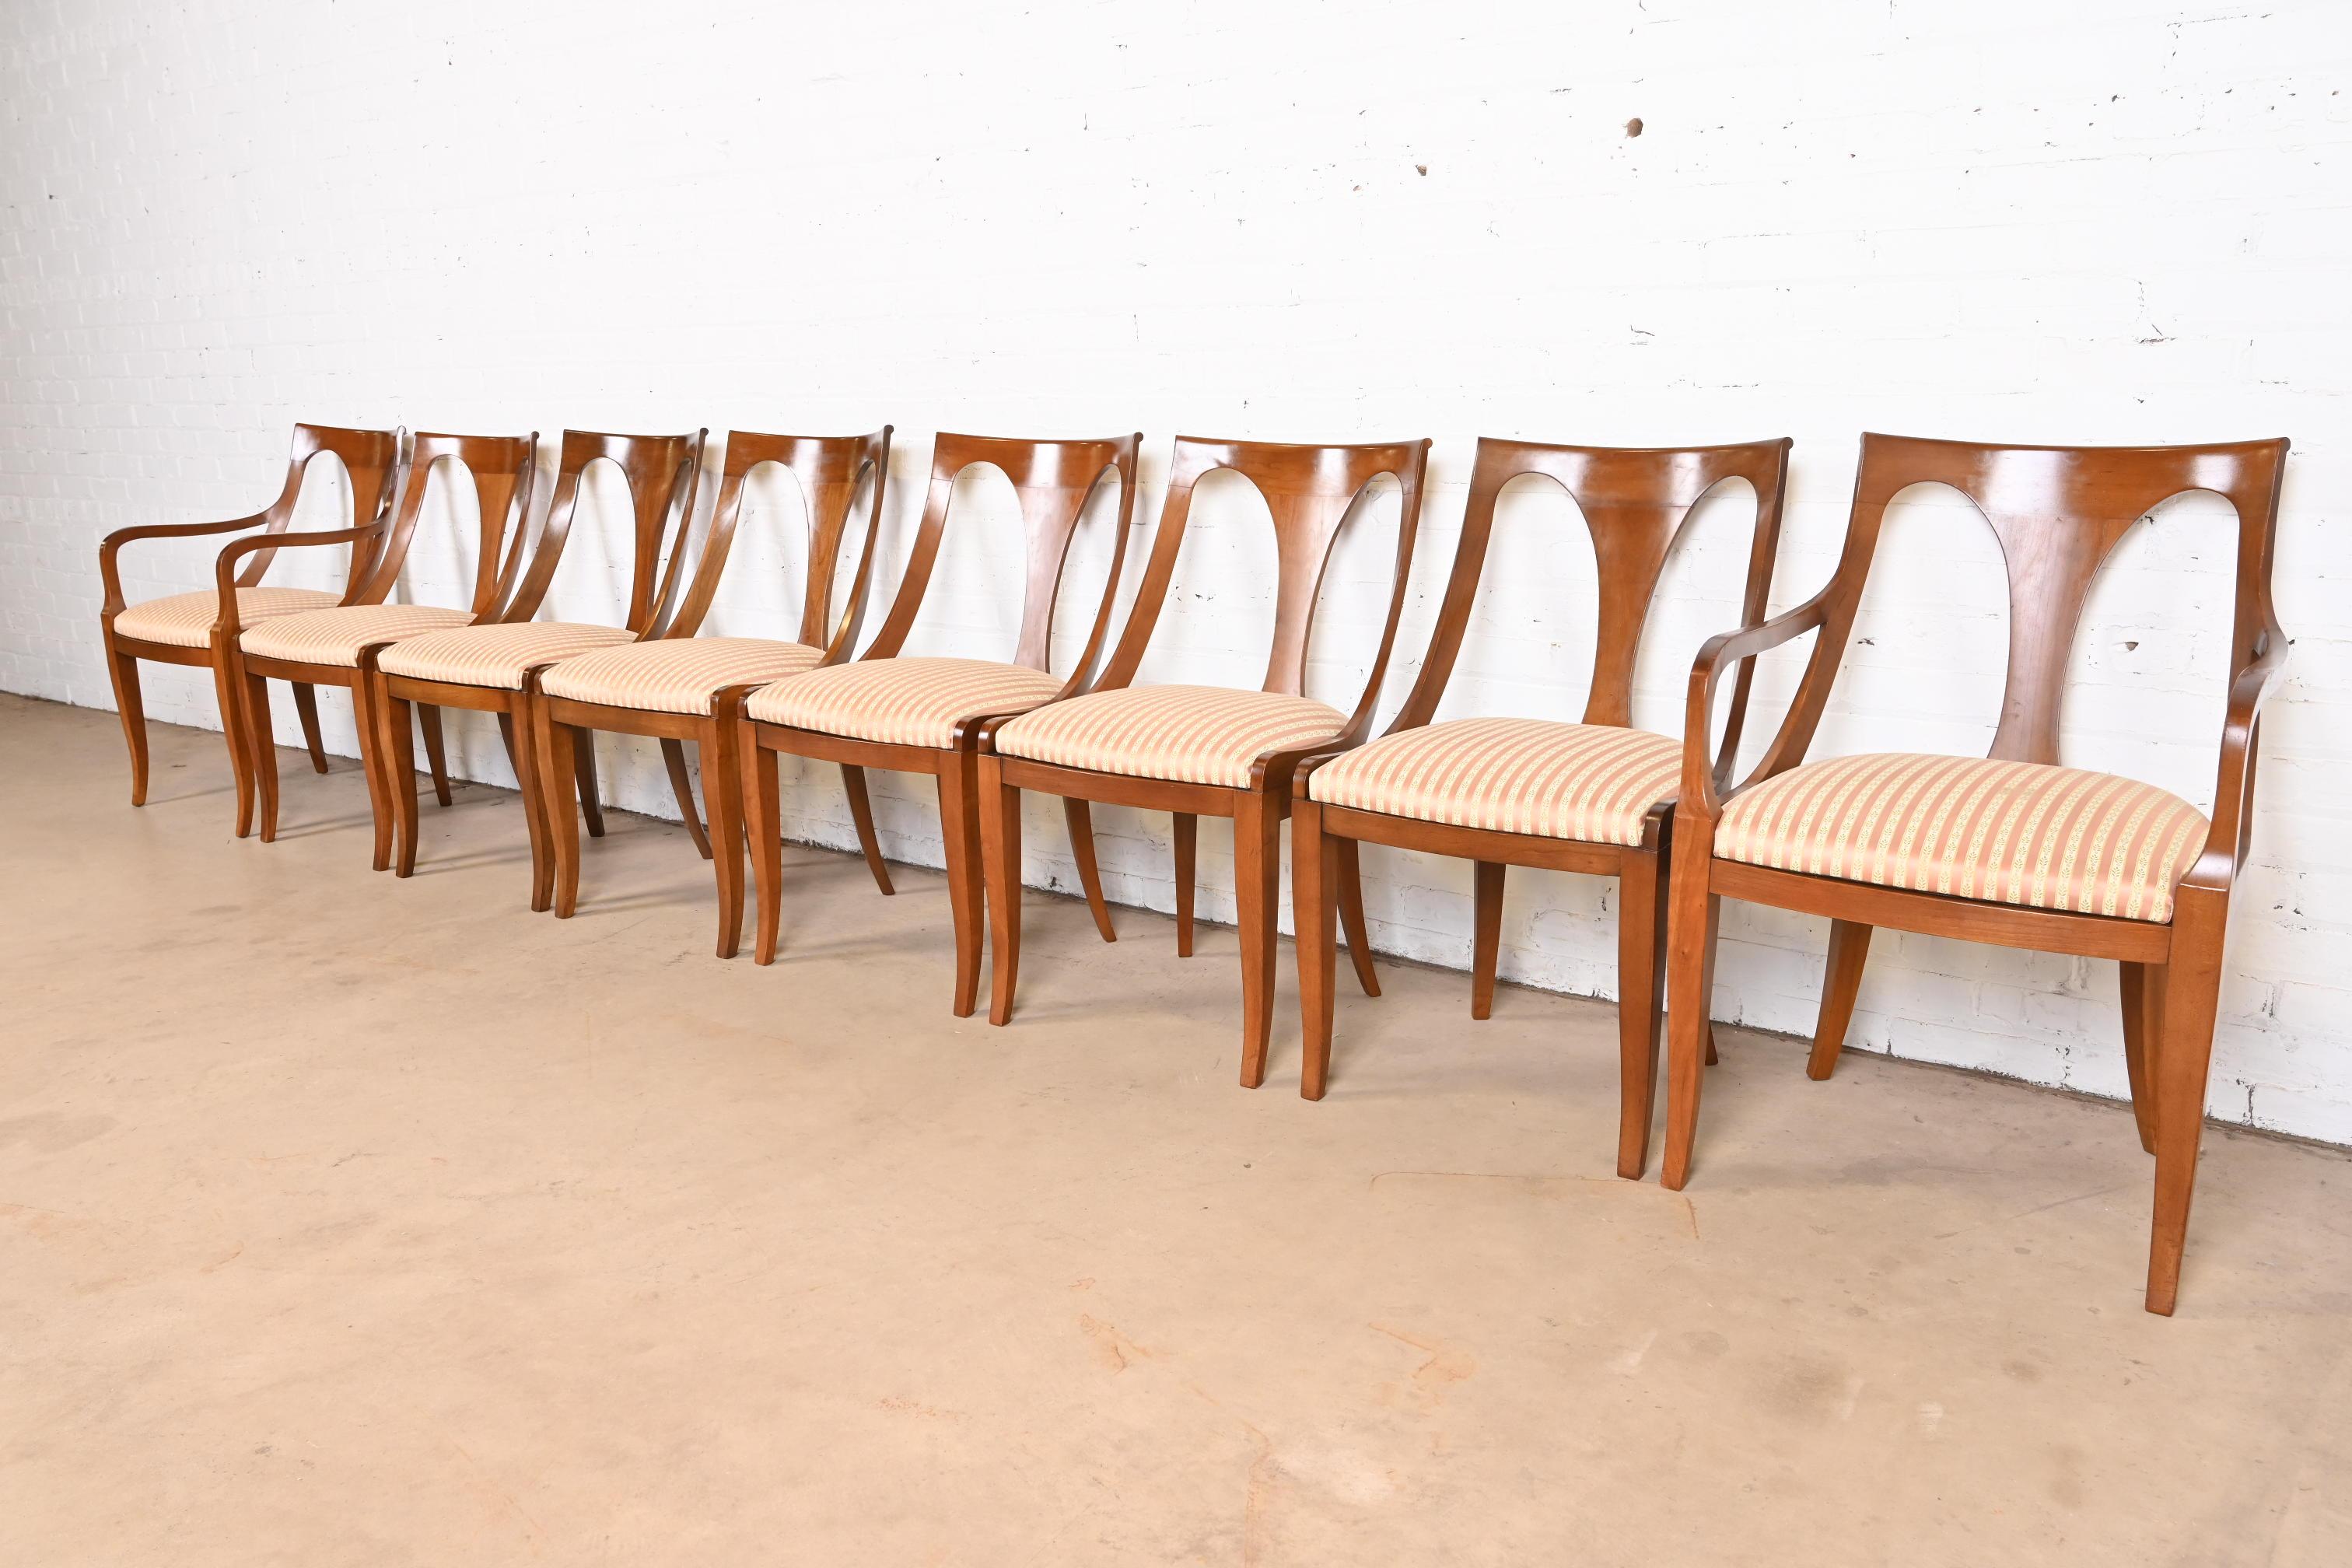 Late 20th Century Kindel Furniture Regency Solid Cherry Wood Dining Chairs, Set of Eight